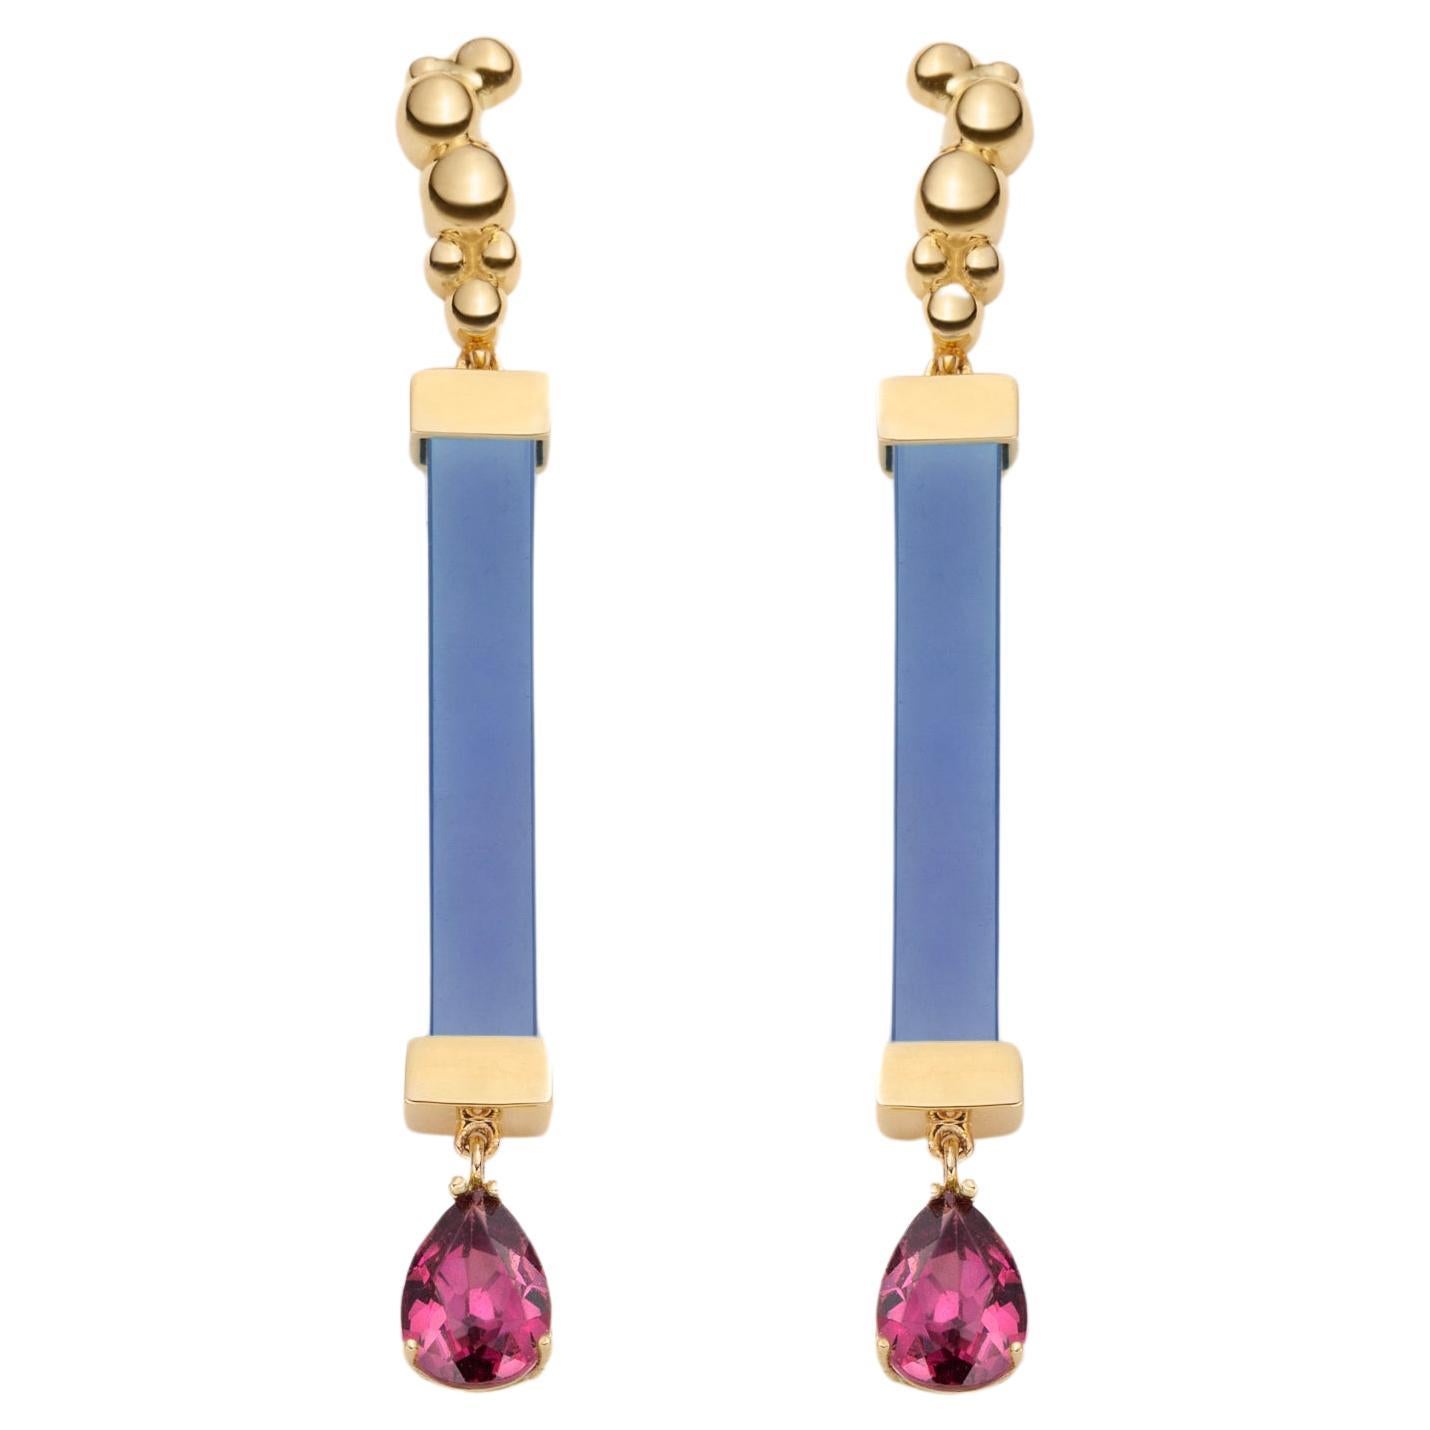 Blue Agate and Rhodolite Earrings in 14K yellow Gold, by SERAFINO